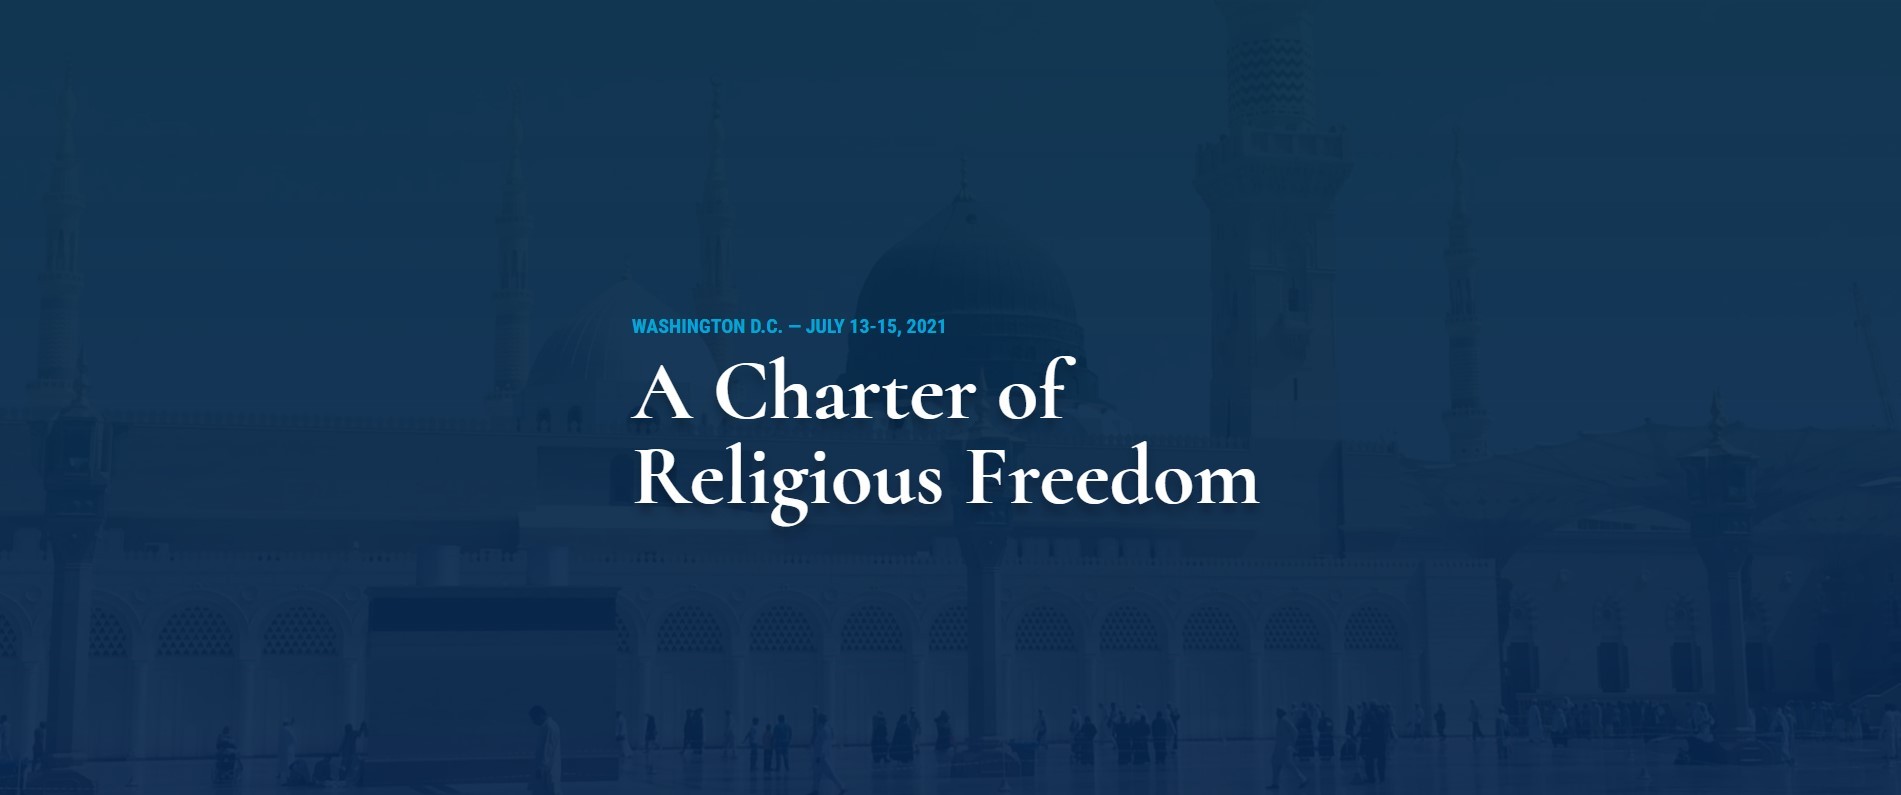 Ahead of International Religious Freedom Summit 2021, coalition of 70+ religious, civil-society groups issue ‘A Charter of Religious Freedom’